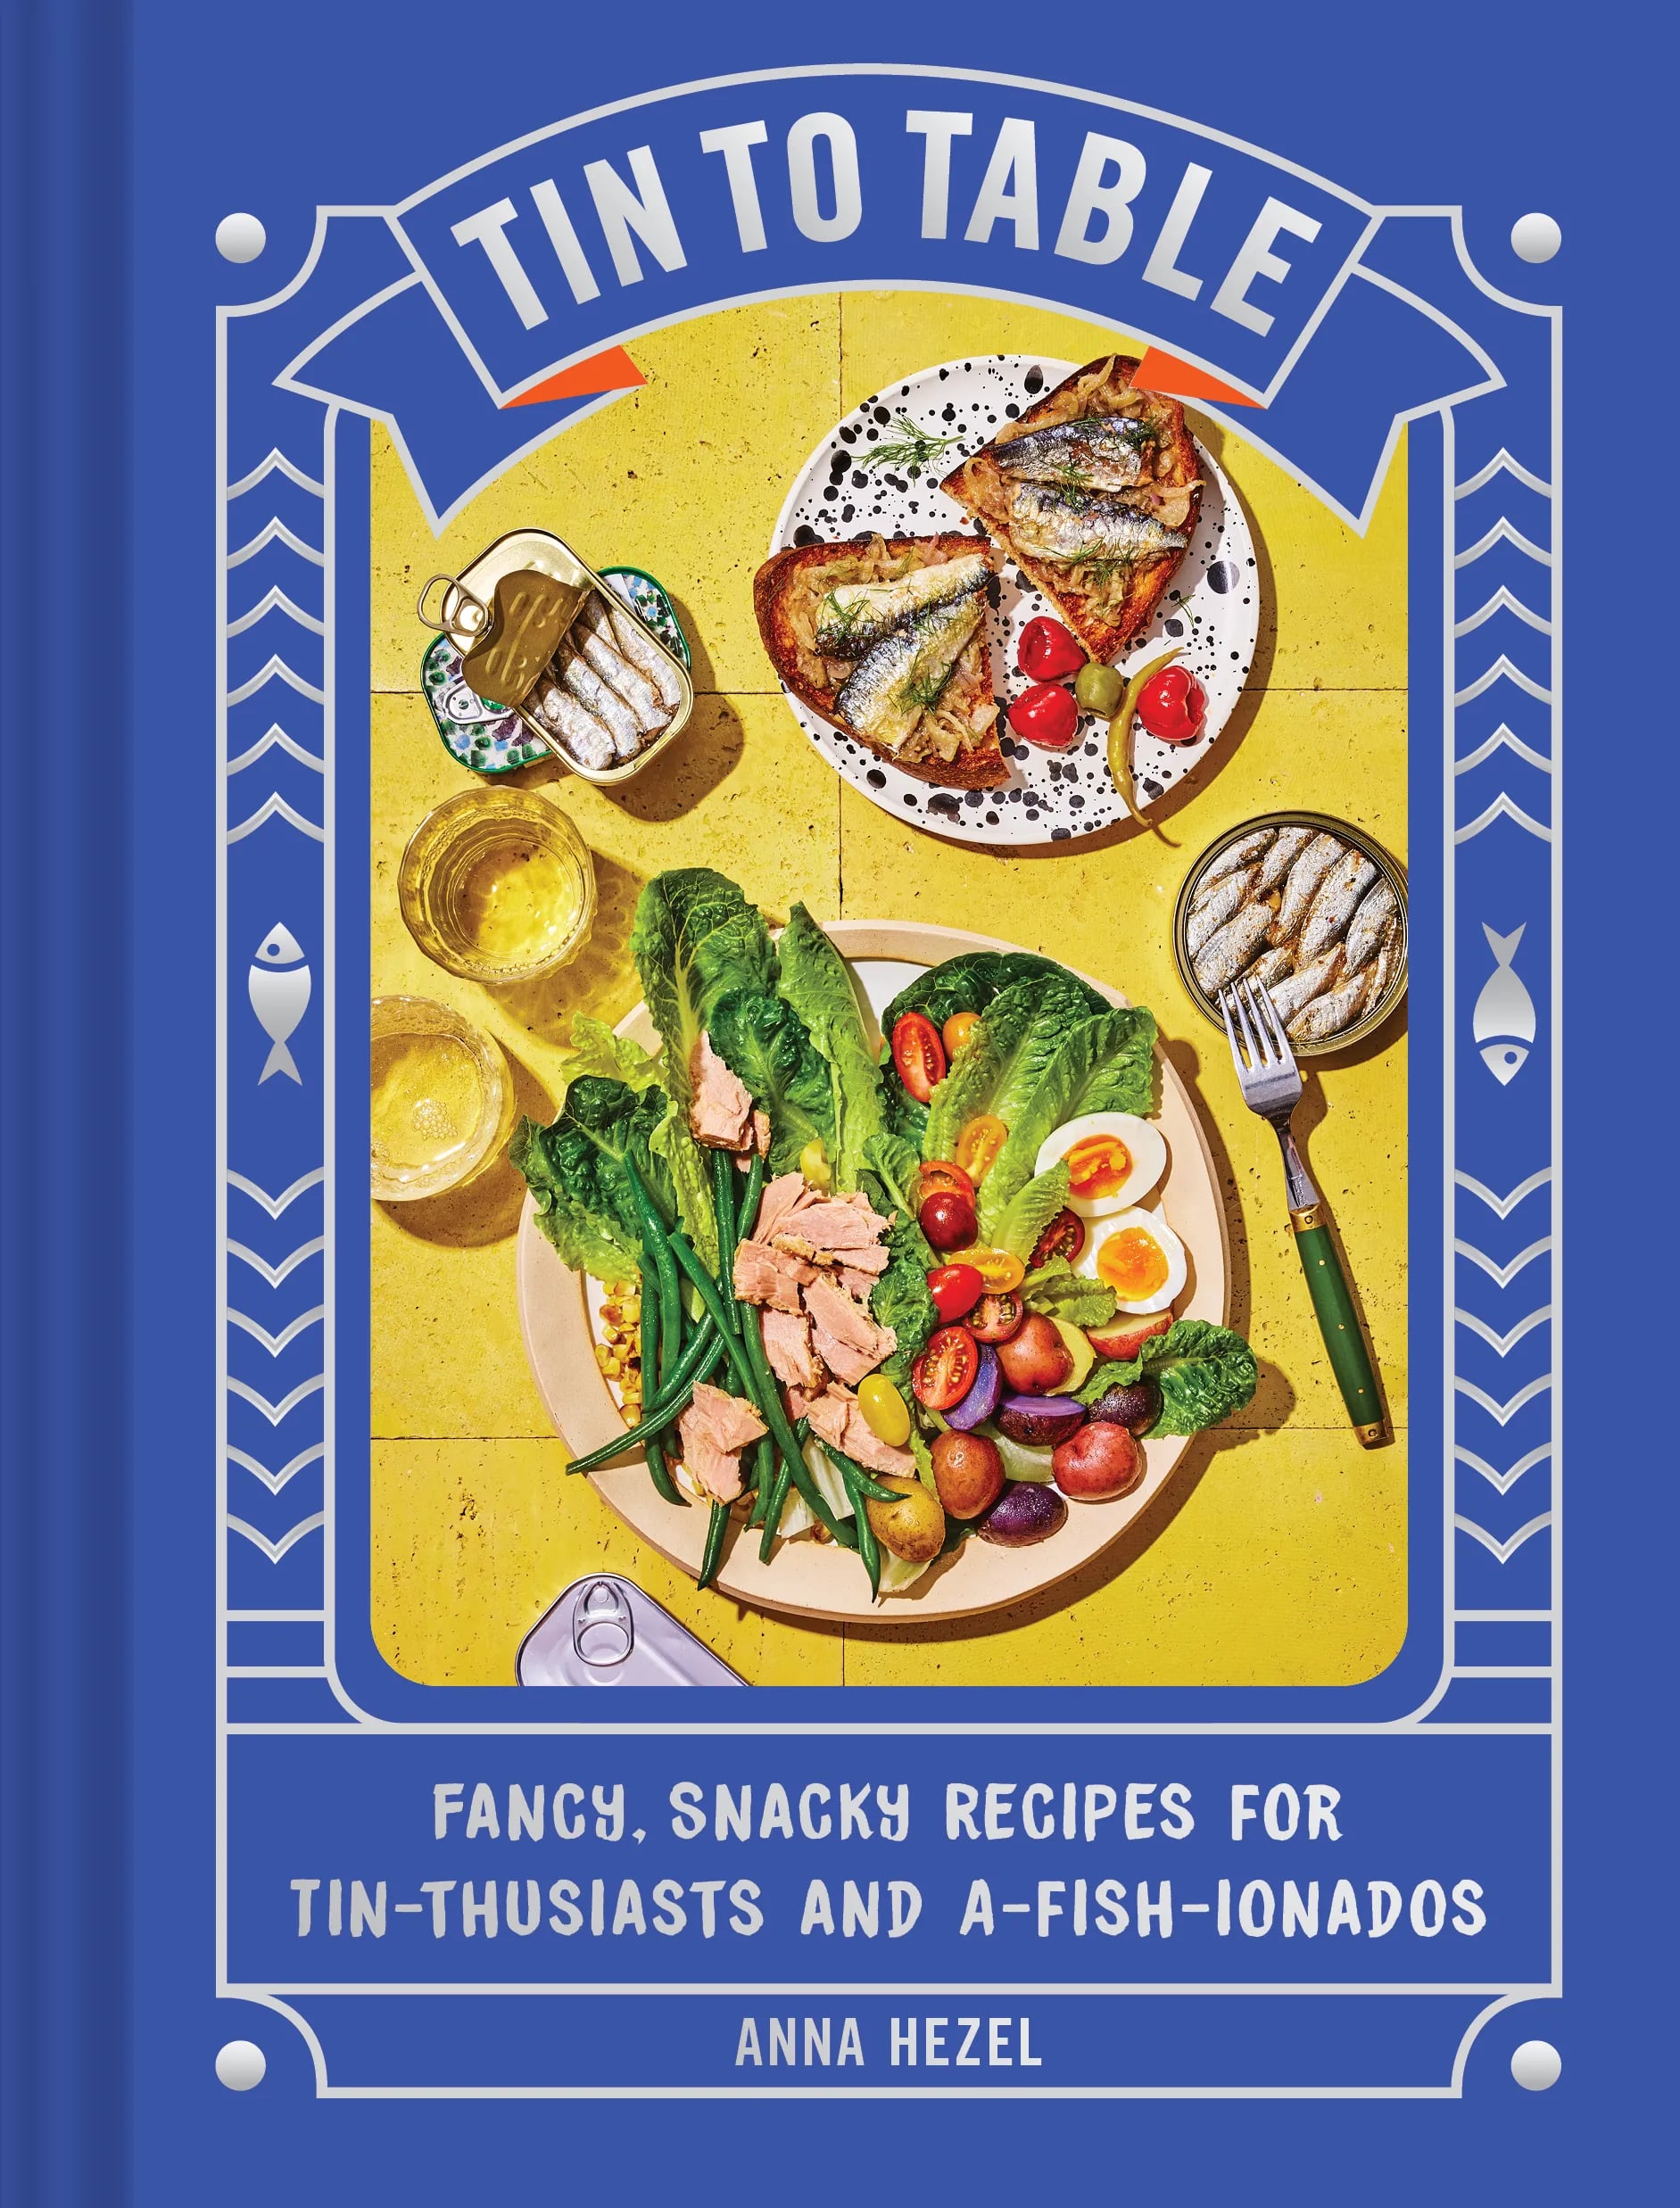 "Tin to Table: Fancy, Snacky Recipes for Tin-thusiasts and A-fish-ionados" by Anna Hezel.